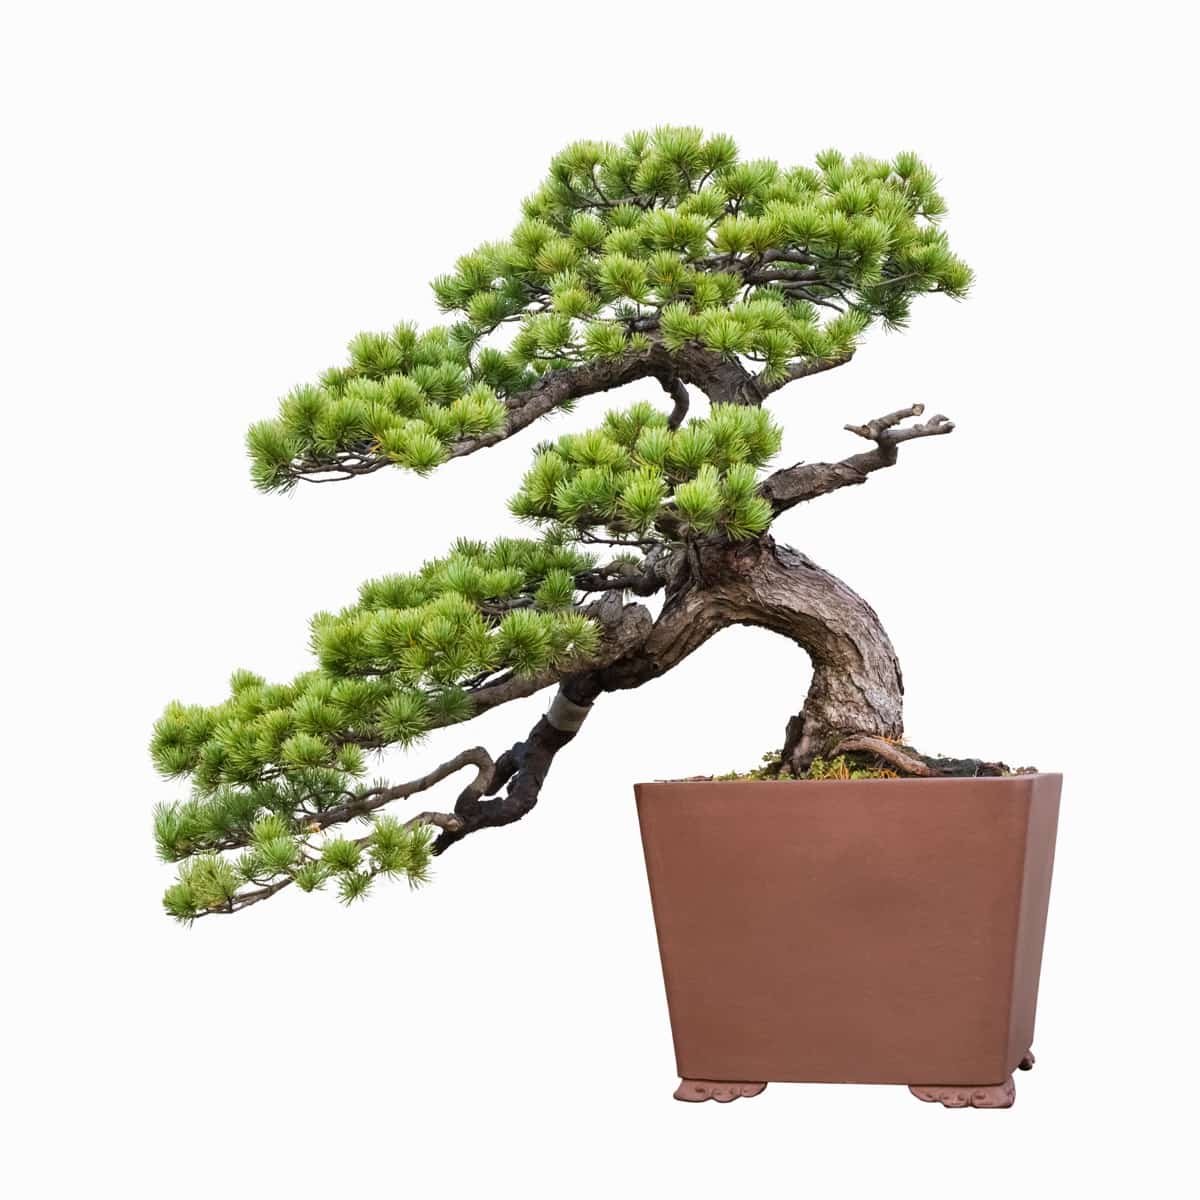 How to Grow and Care for Petite Pine Bonsai